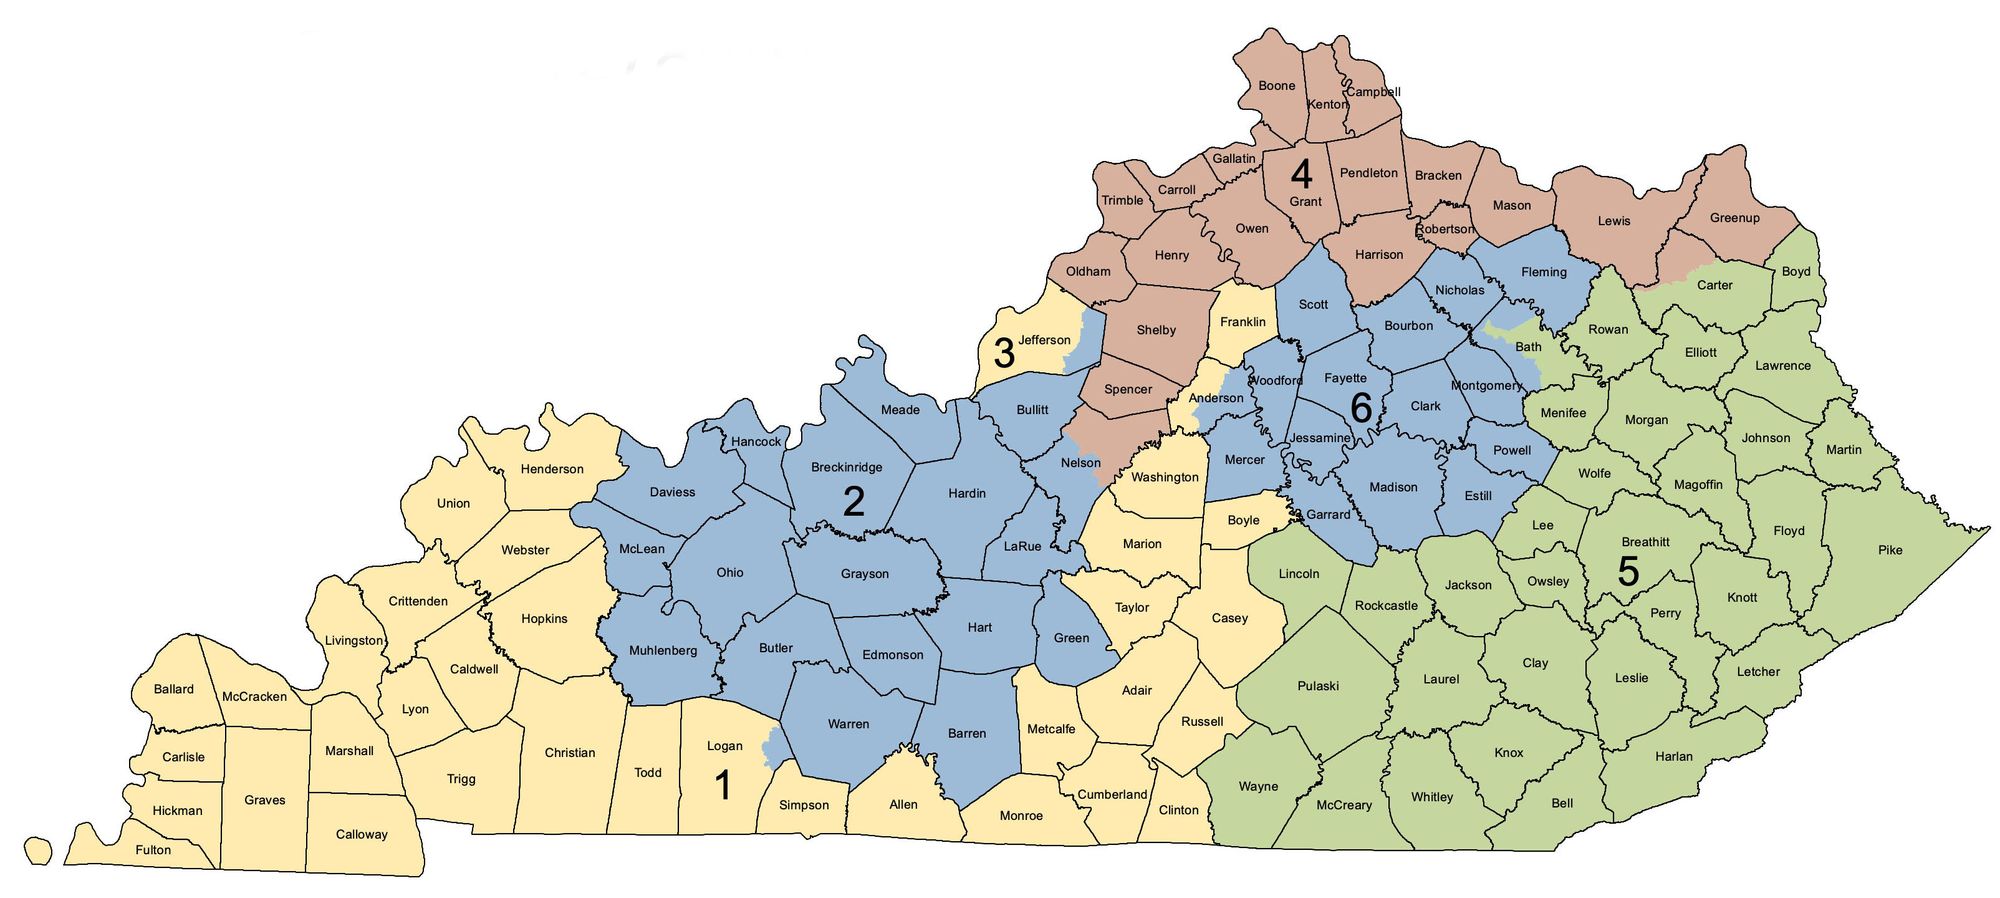 New Congressional map proposed by KY Repubs